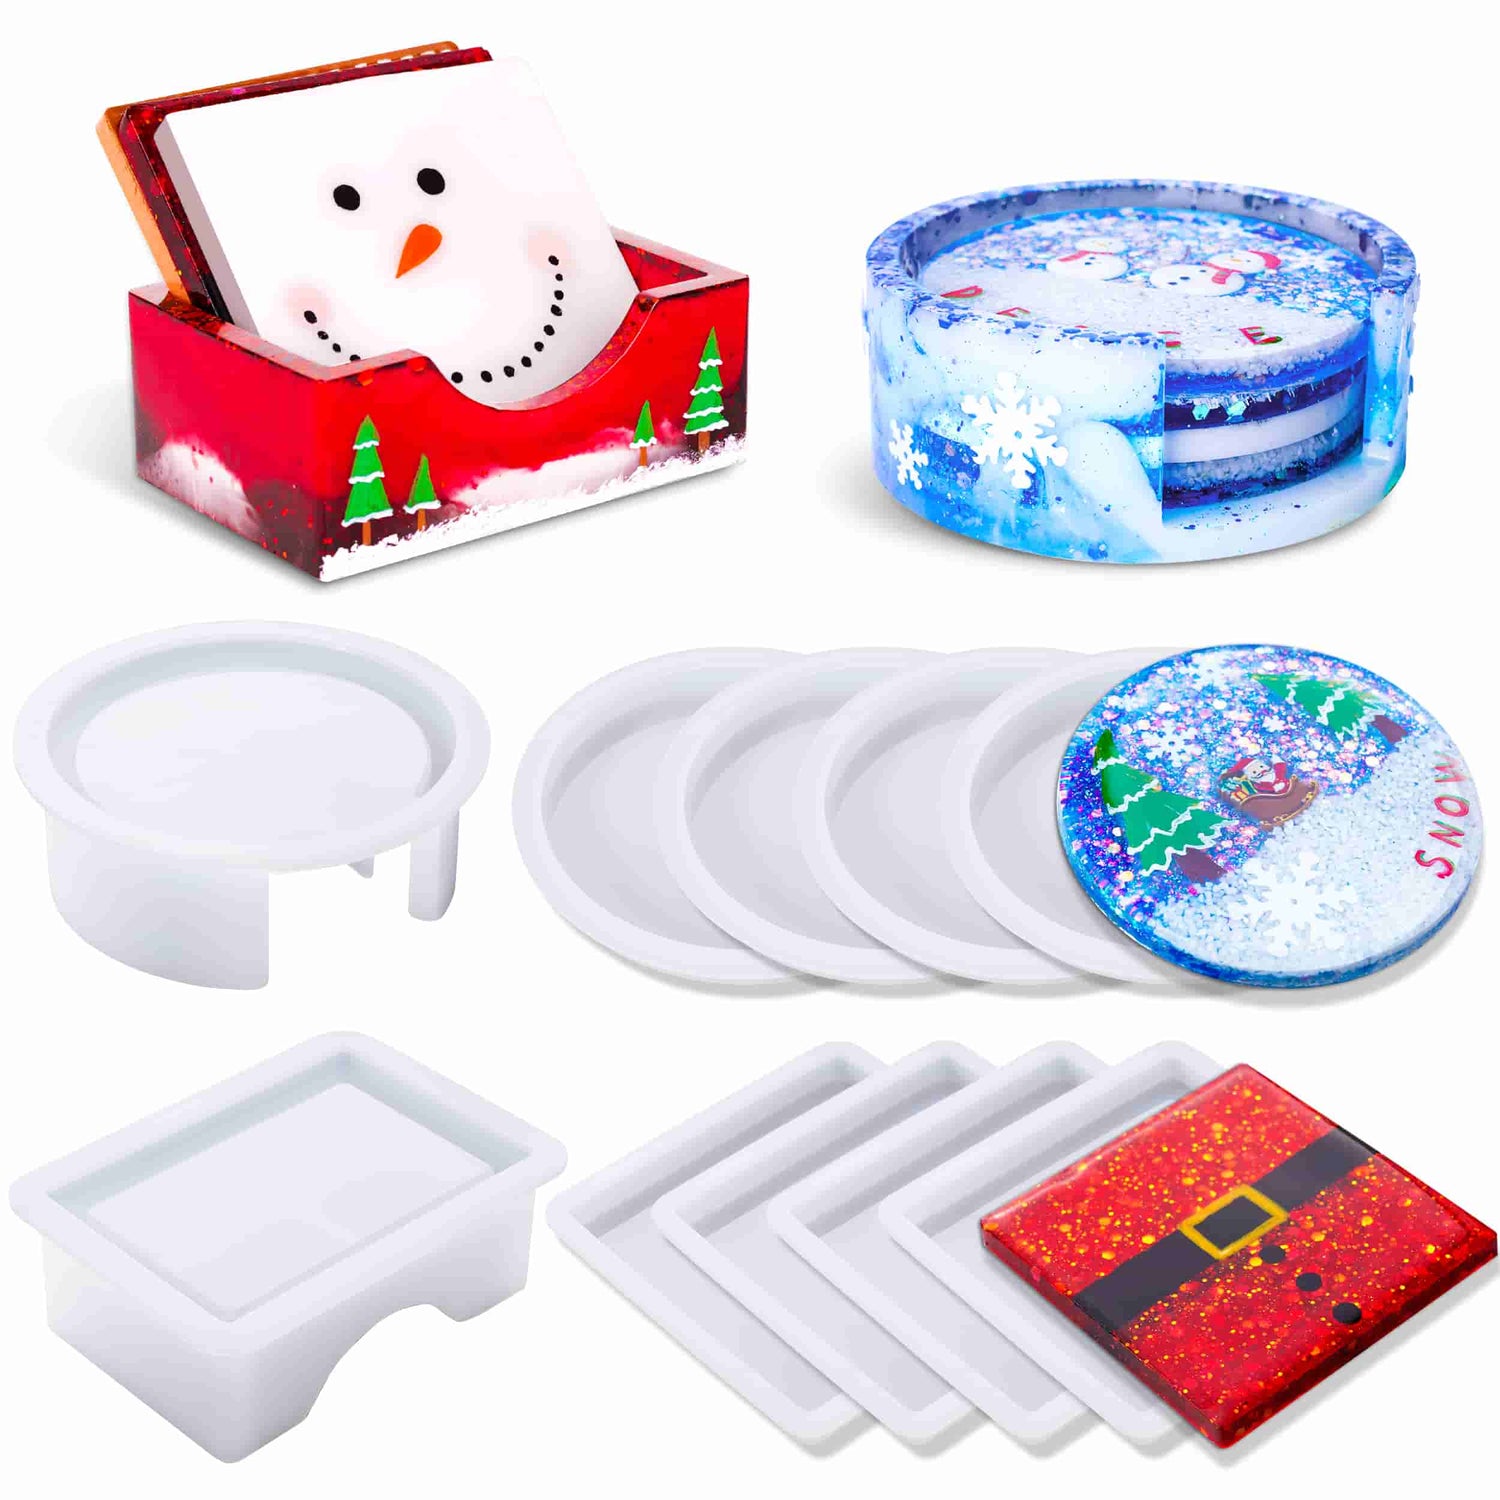 Silicone Coaster for Resin Casting,Epoxy Resin Coaster Kit Including 8 Pcs  Coasters and 2 Pcs Holders